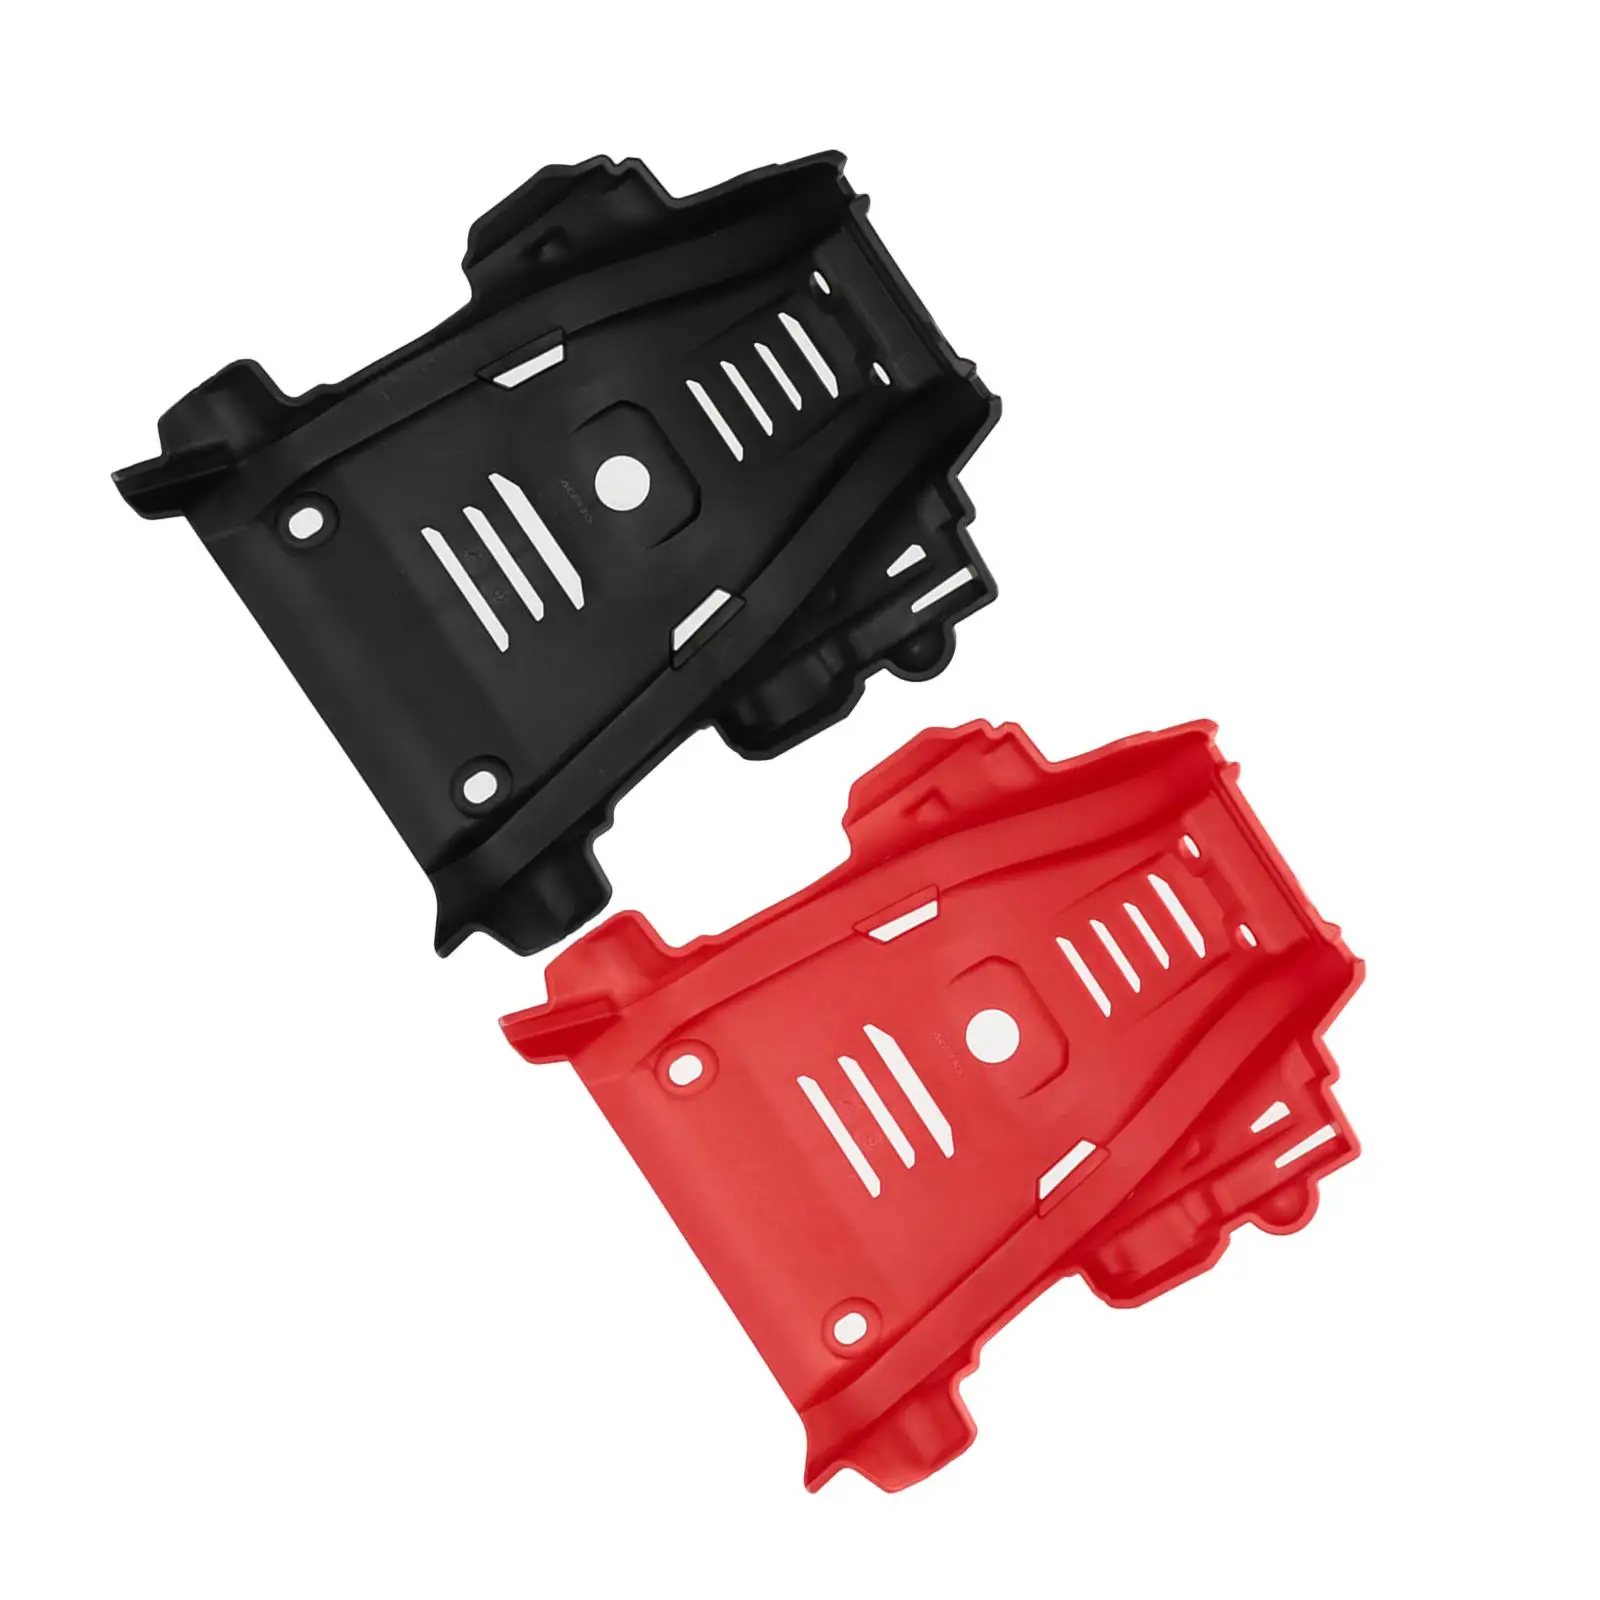 Motorcycle Engine Base Chassis Guard plate for Crf300L Motorcycles